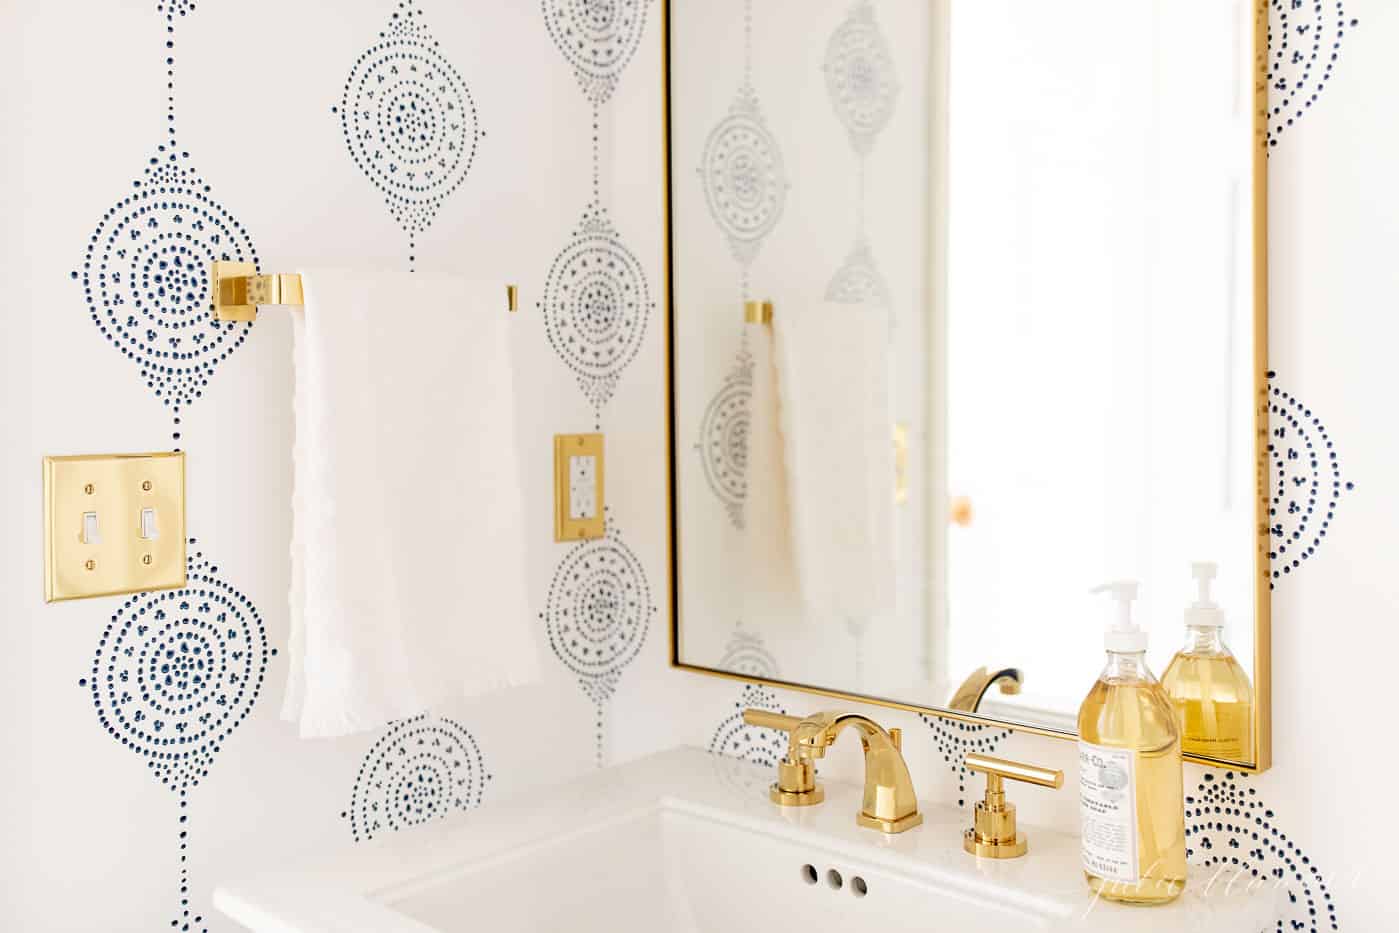 Are there any downsides of a wallpaper in the bathroom?